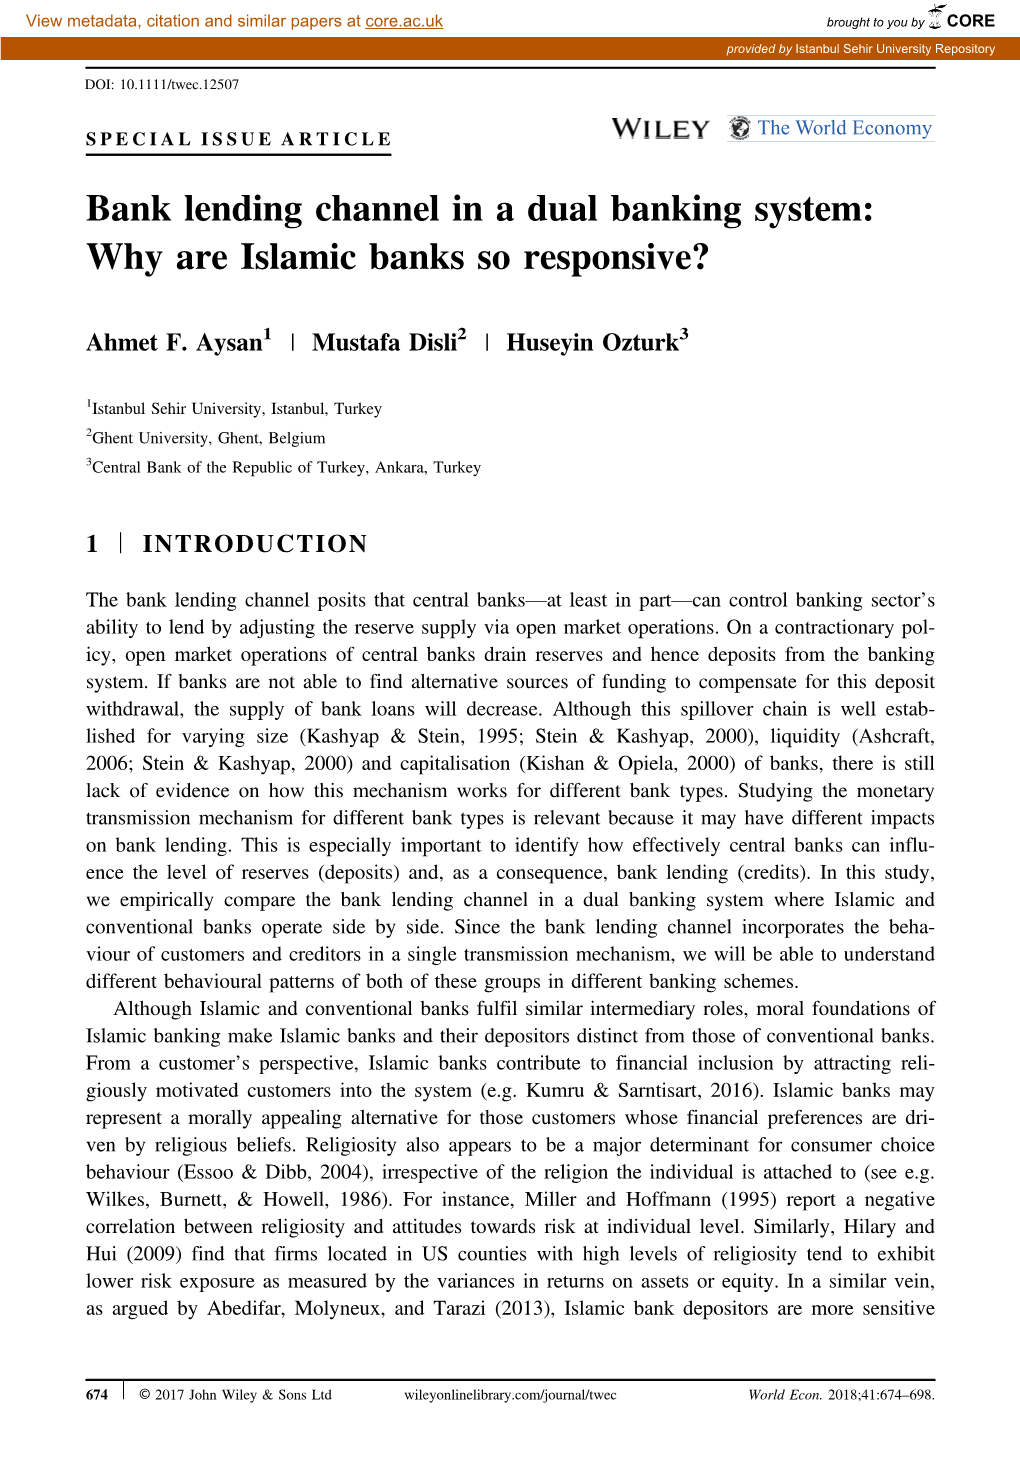 Bank Lending Channel in a Dual Banking System: Why Are Islamic Banks So Responsive?